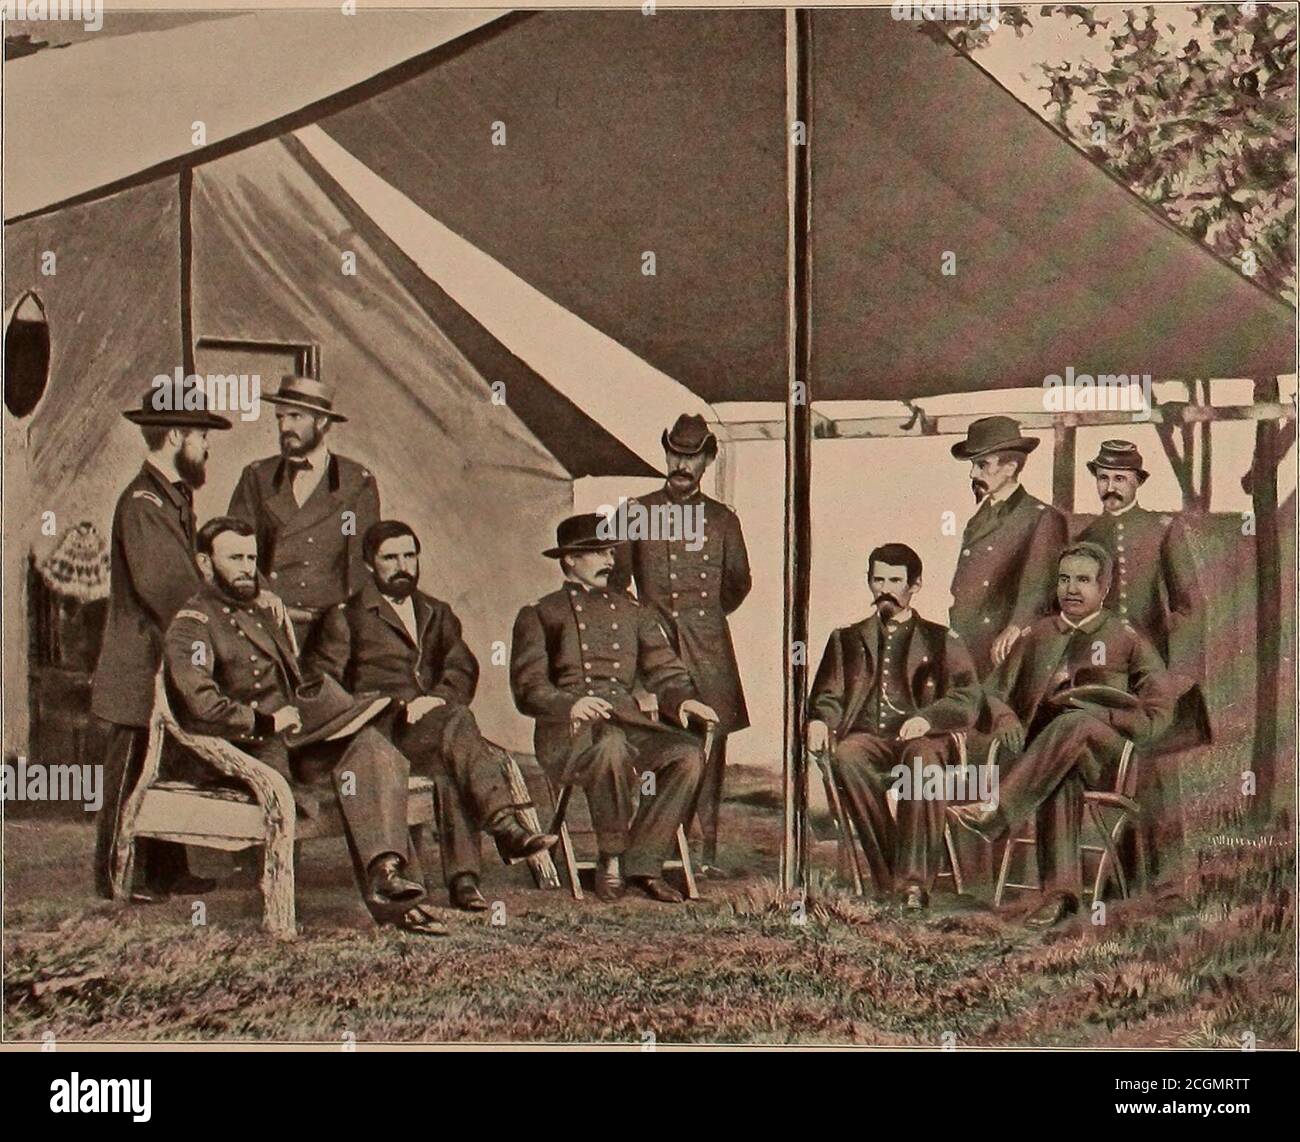 . The American civil war book and Grant album, 'art immortelles' . HEADQUARTERS — ARMY OF THE POTOMAC — GENERAL GRANT AND STAFF. At Ciiy Point, Va , August, 1864. lkginning nt the left as follows: 1. —I.t.-Col. Adam Bade.ni. 2. —Gen.U.S.Grant. 8. — Lt.-Col. Cyrns B.Comstock. 1.— Brig.-Gen John A.Rawlins, o.— Lt.-Col. Wm. L. Duff.6. — Lt.-Col. Frederick T. Dent. 7. — Lt.-Col. Horace Porter. 8. — Lt.-Col. Orville K. Babcock. 9. —Lt.-Col. Ely S. Parker. 10.—Capt. Henry C. RobinetL Stock Photo